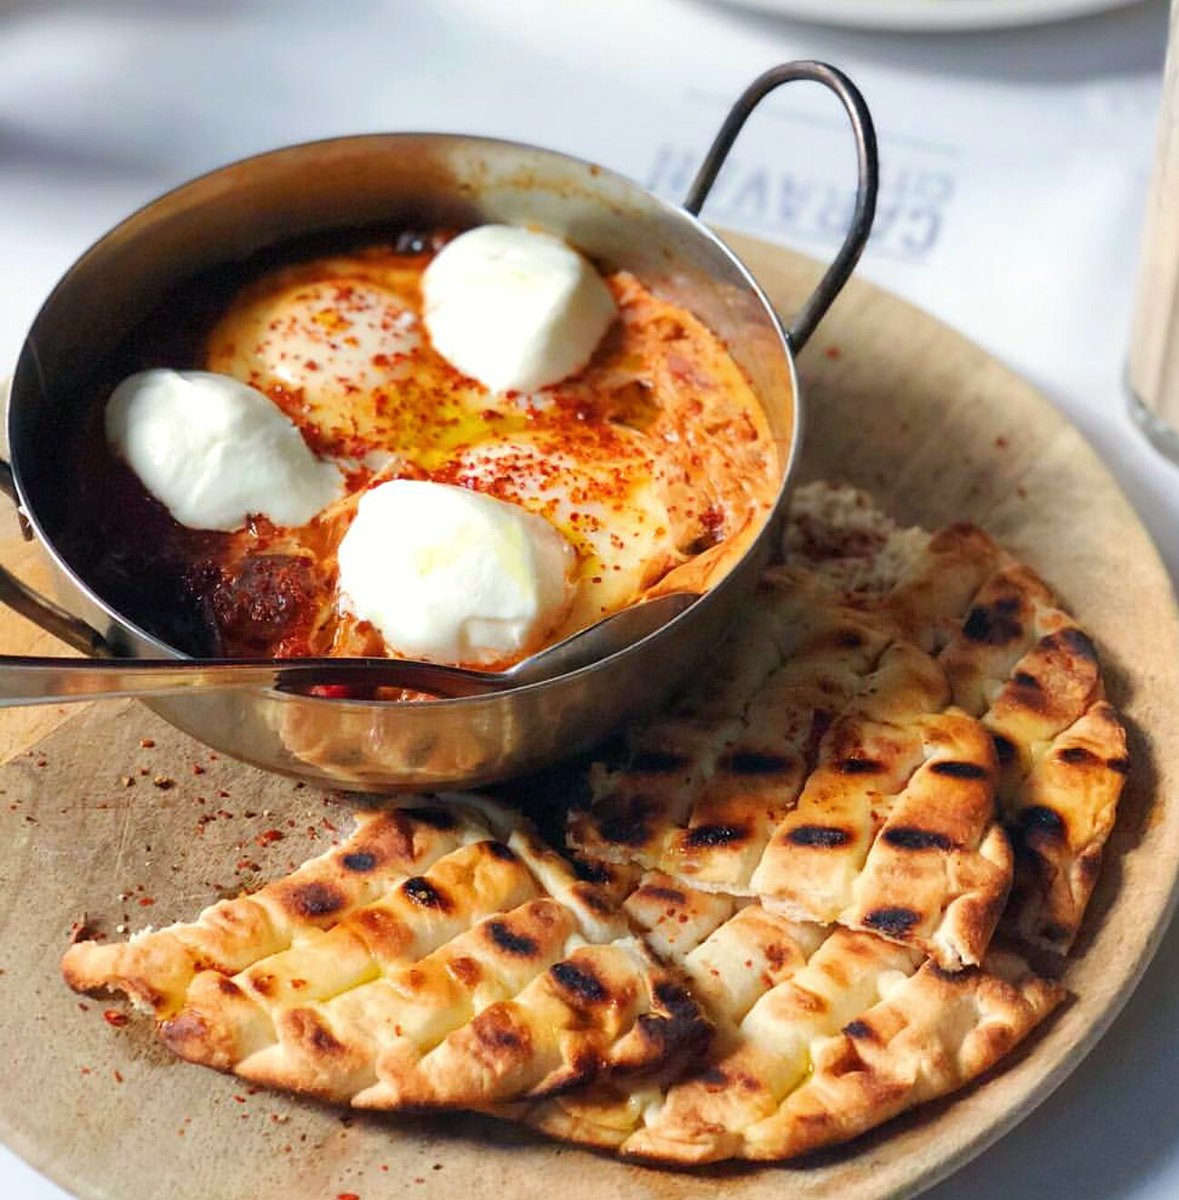 We cannot contain our excitement for how much #Sun and #Brunching is to be had this beautiful #MayBankHoliday weekend! ☀️🍳🤤 #SaturdayBrunch @CaravanResto | 📷 @Bakeryeee